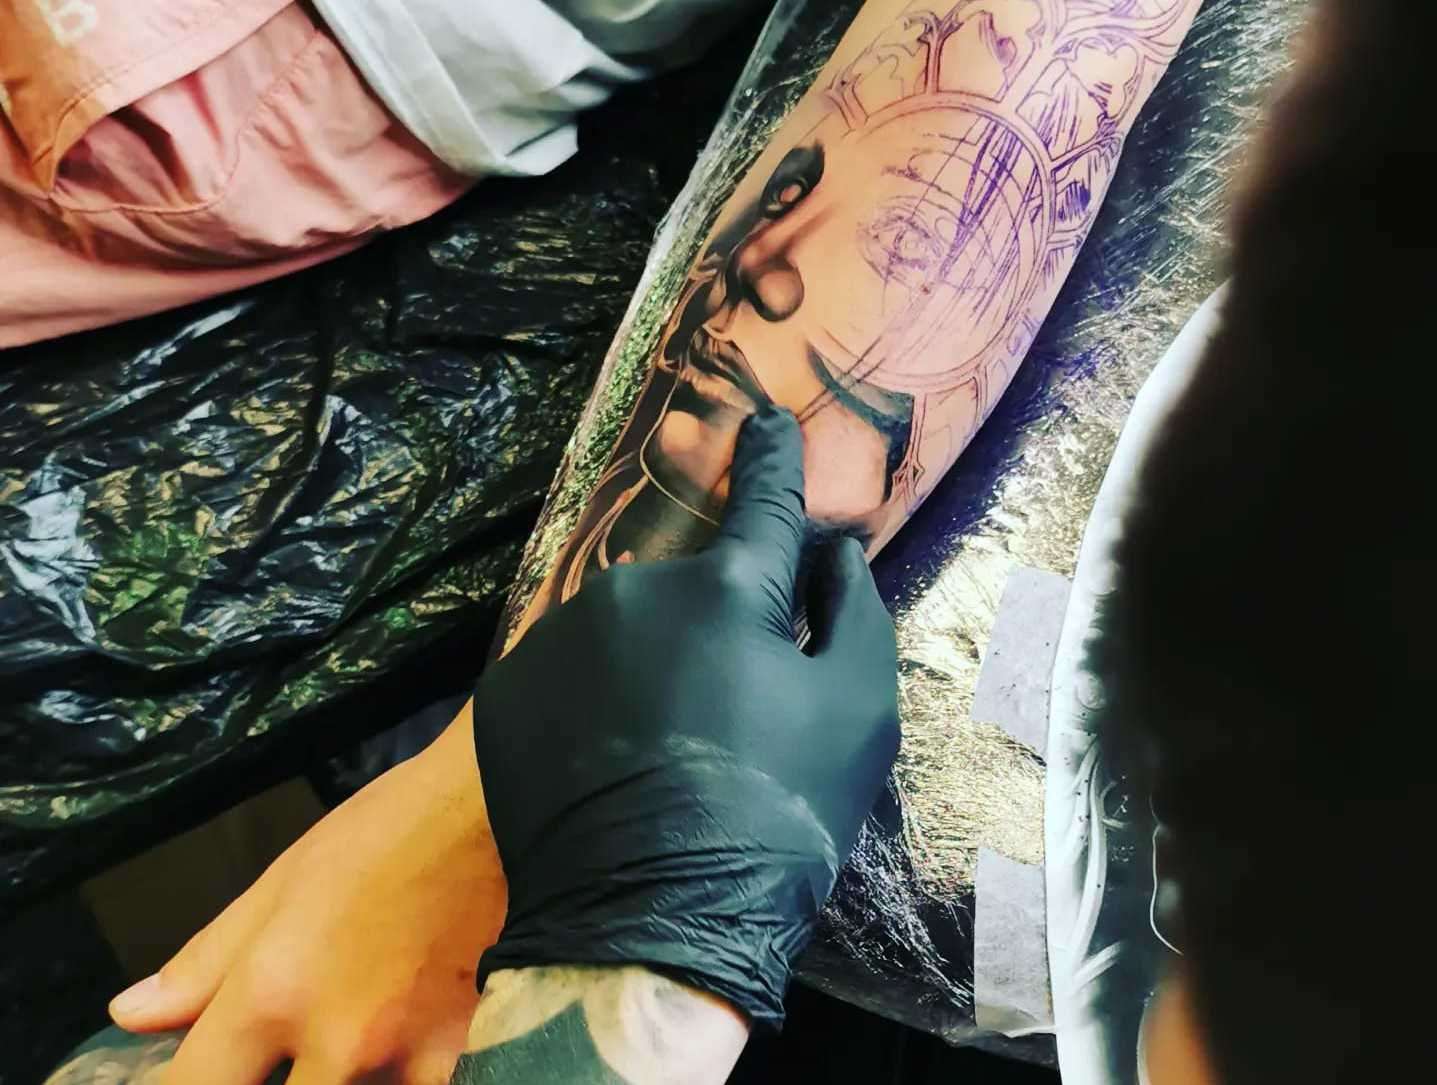 Visitors can get new tattoos at the convention or book future tattoos with artists. Picture: Maidstone Tattoo Extravaganza